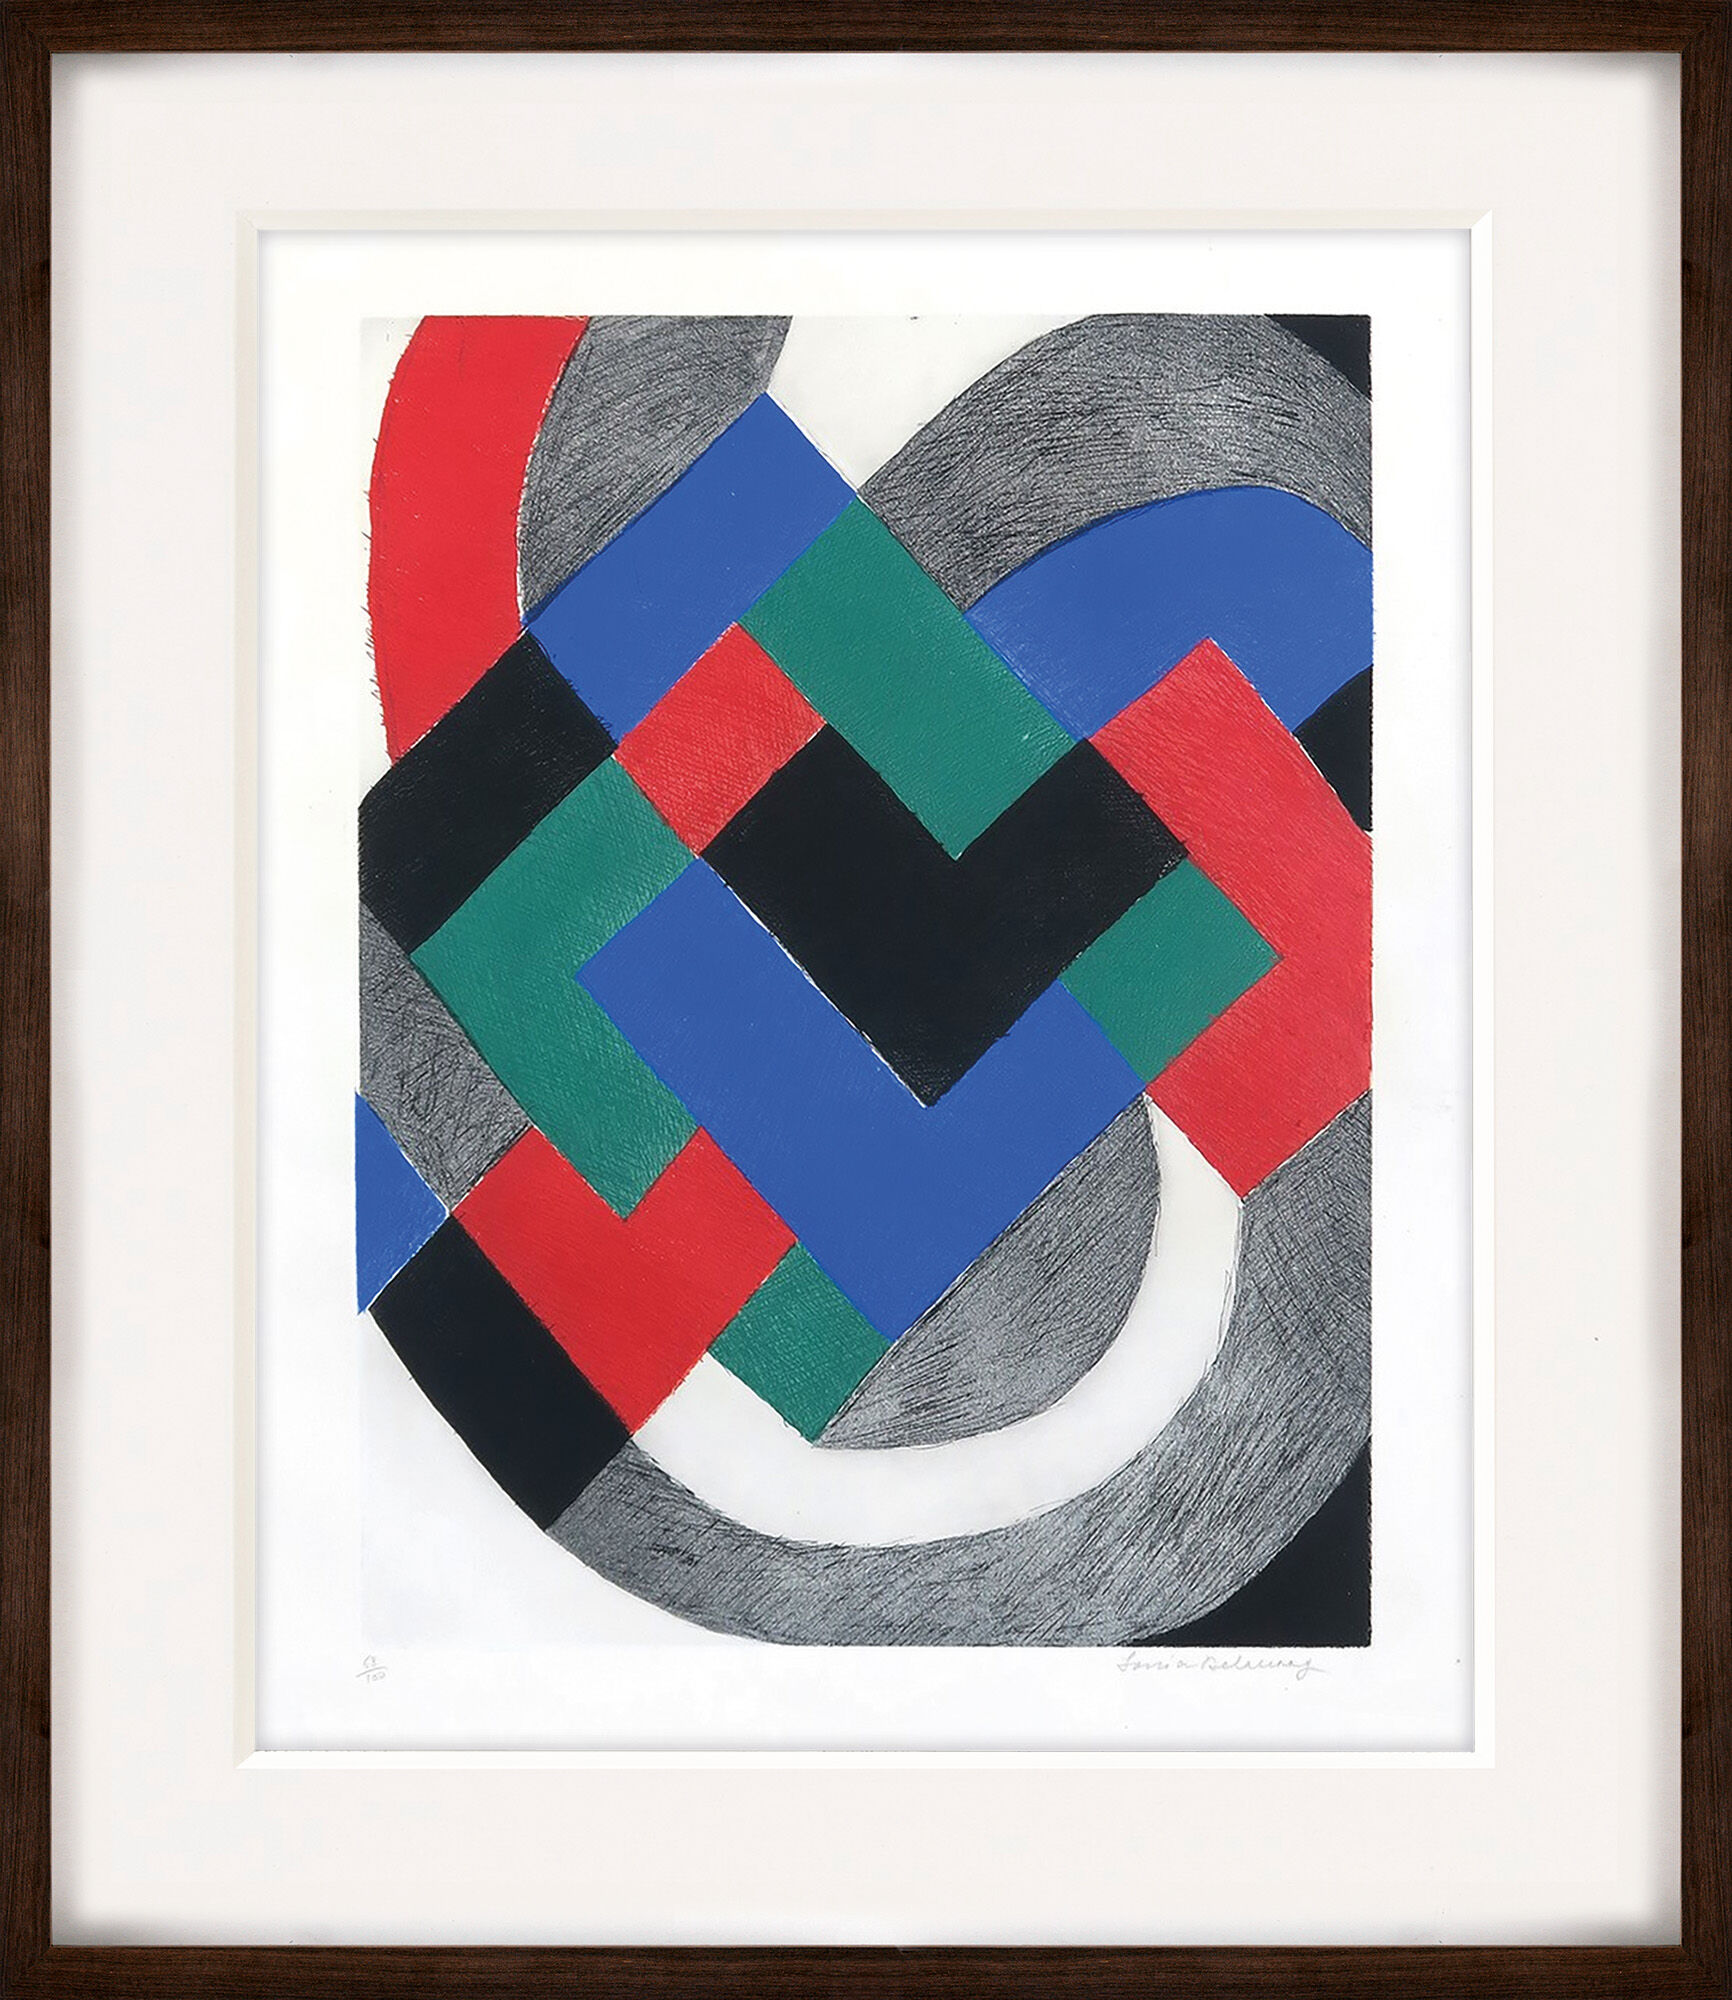 Picture "Gravure II" (1970) by Sonia Delaunay